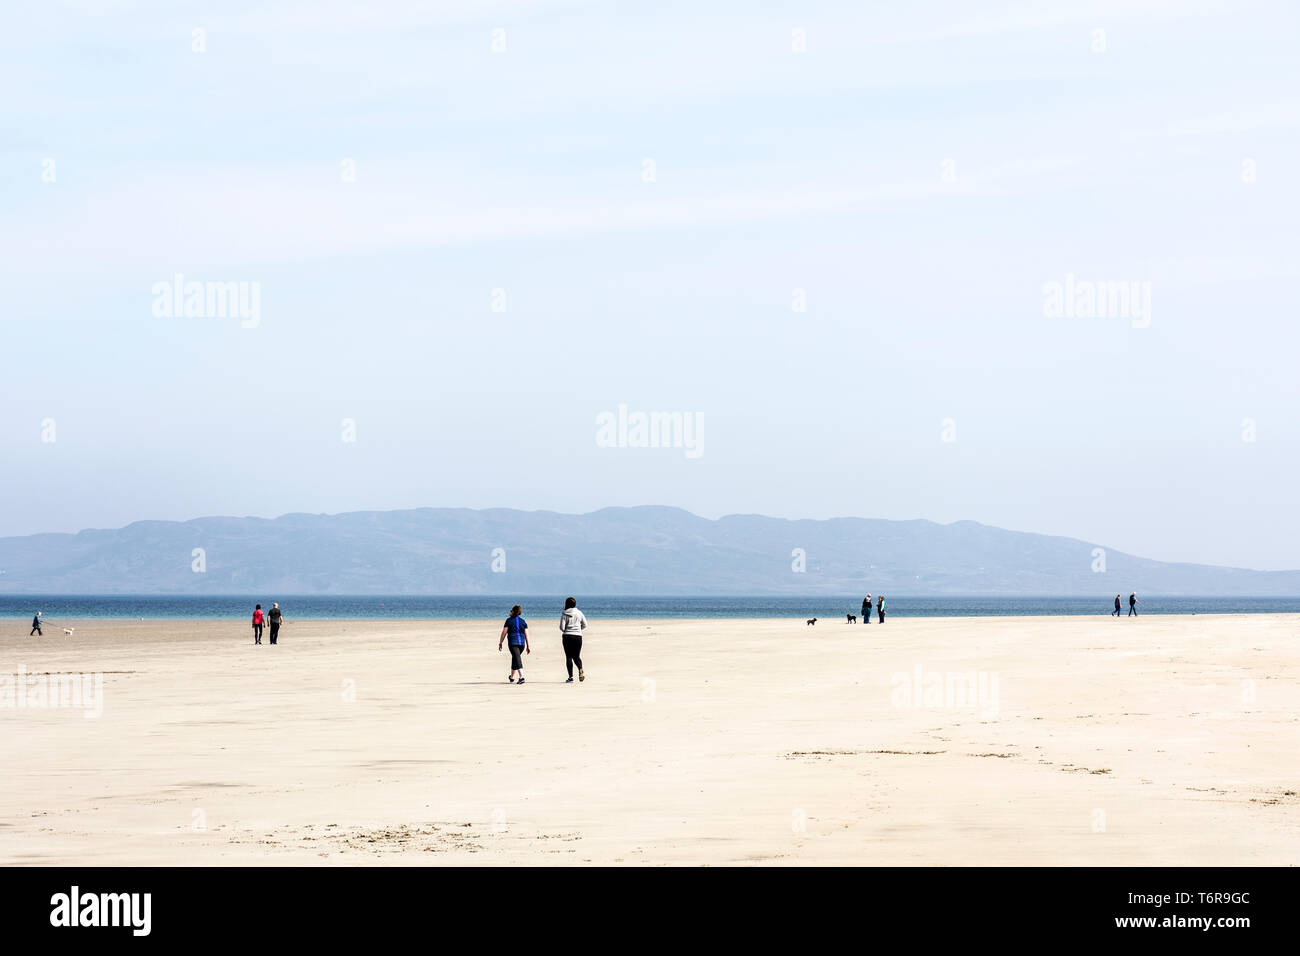 People on a beach walking, County Donegal, Ireland Stock Photo